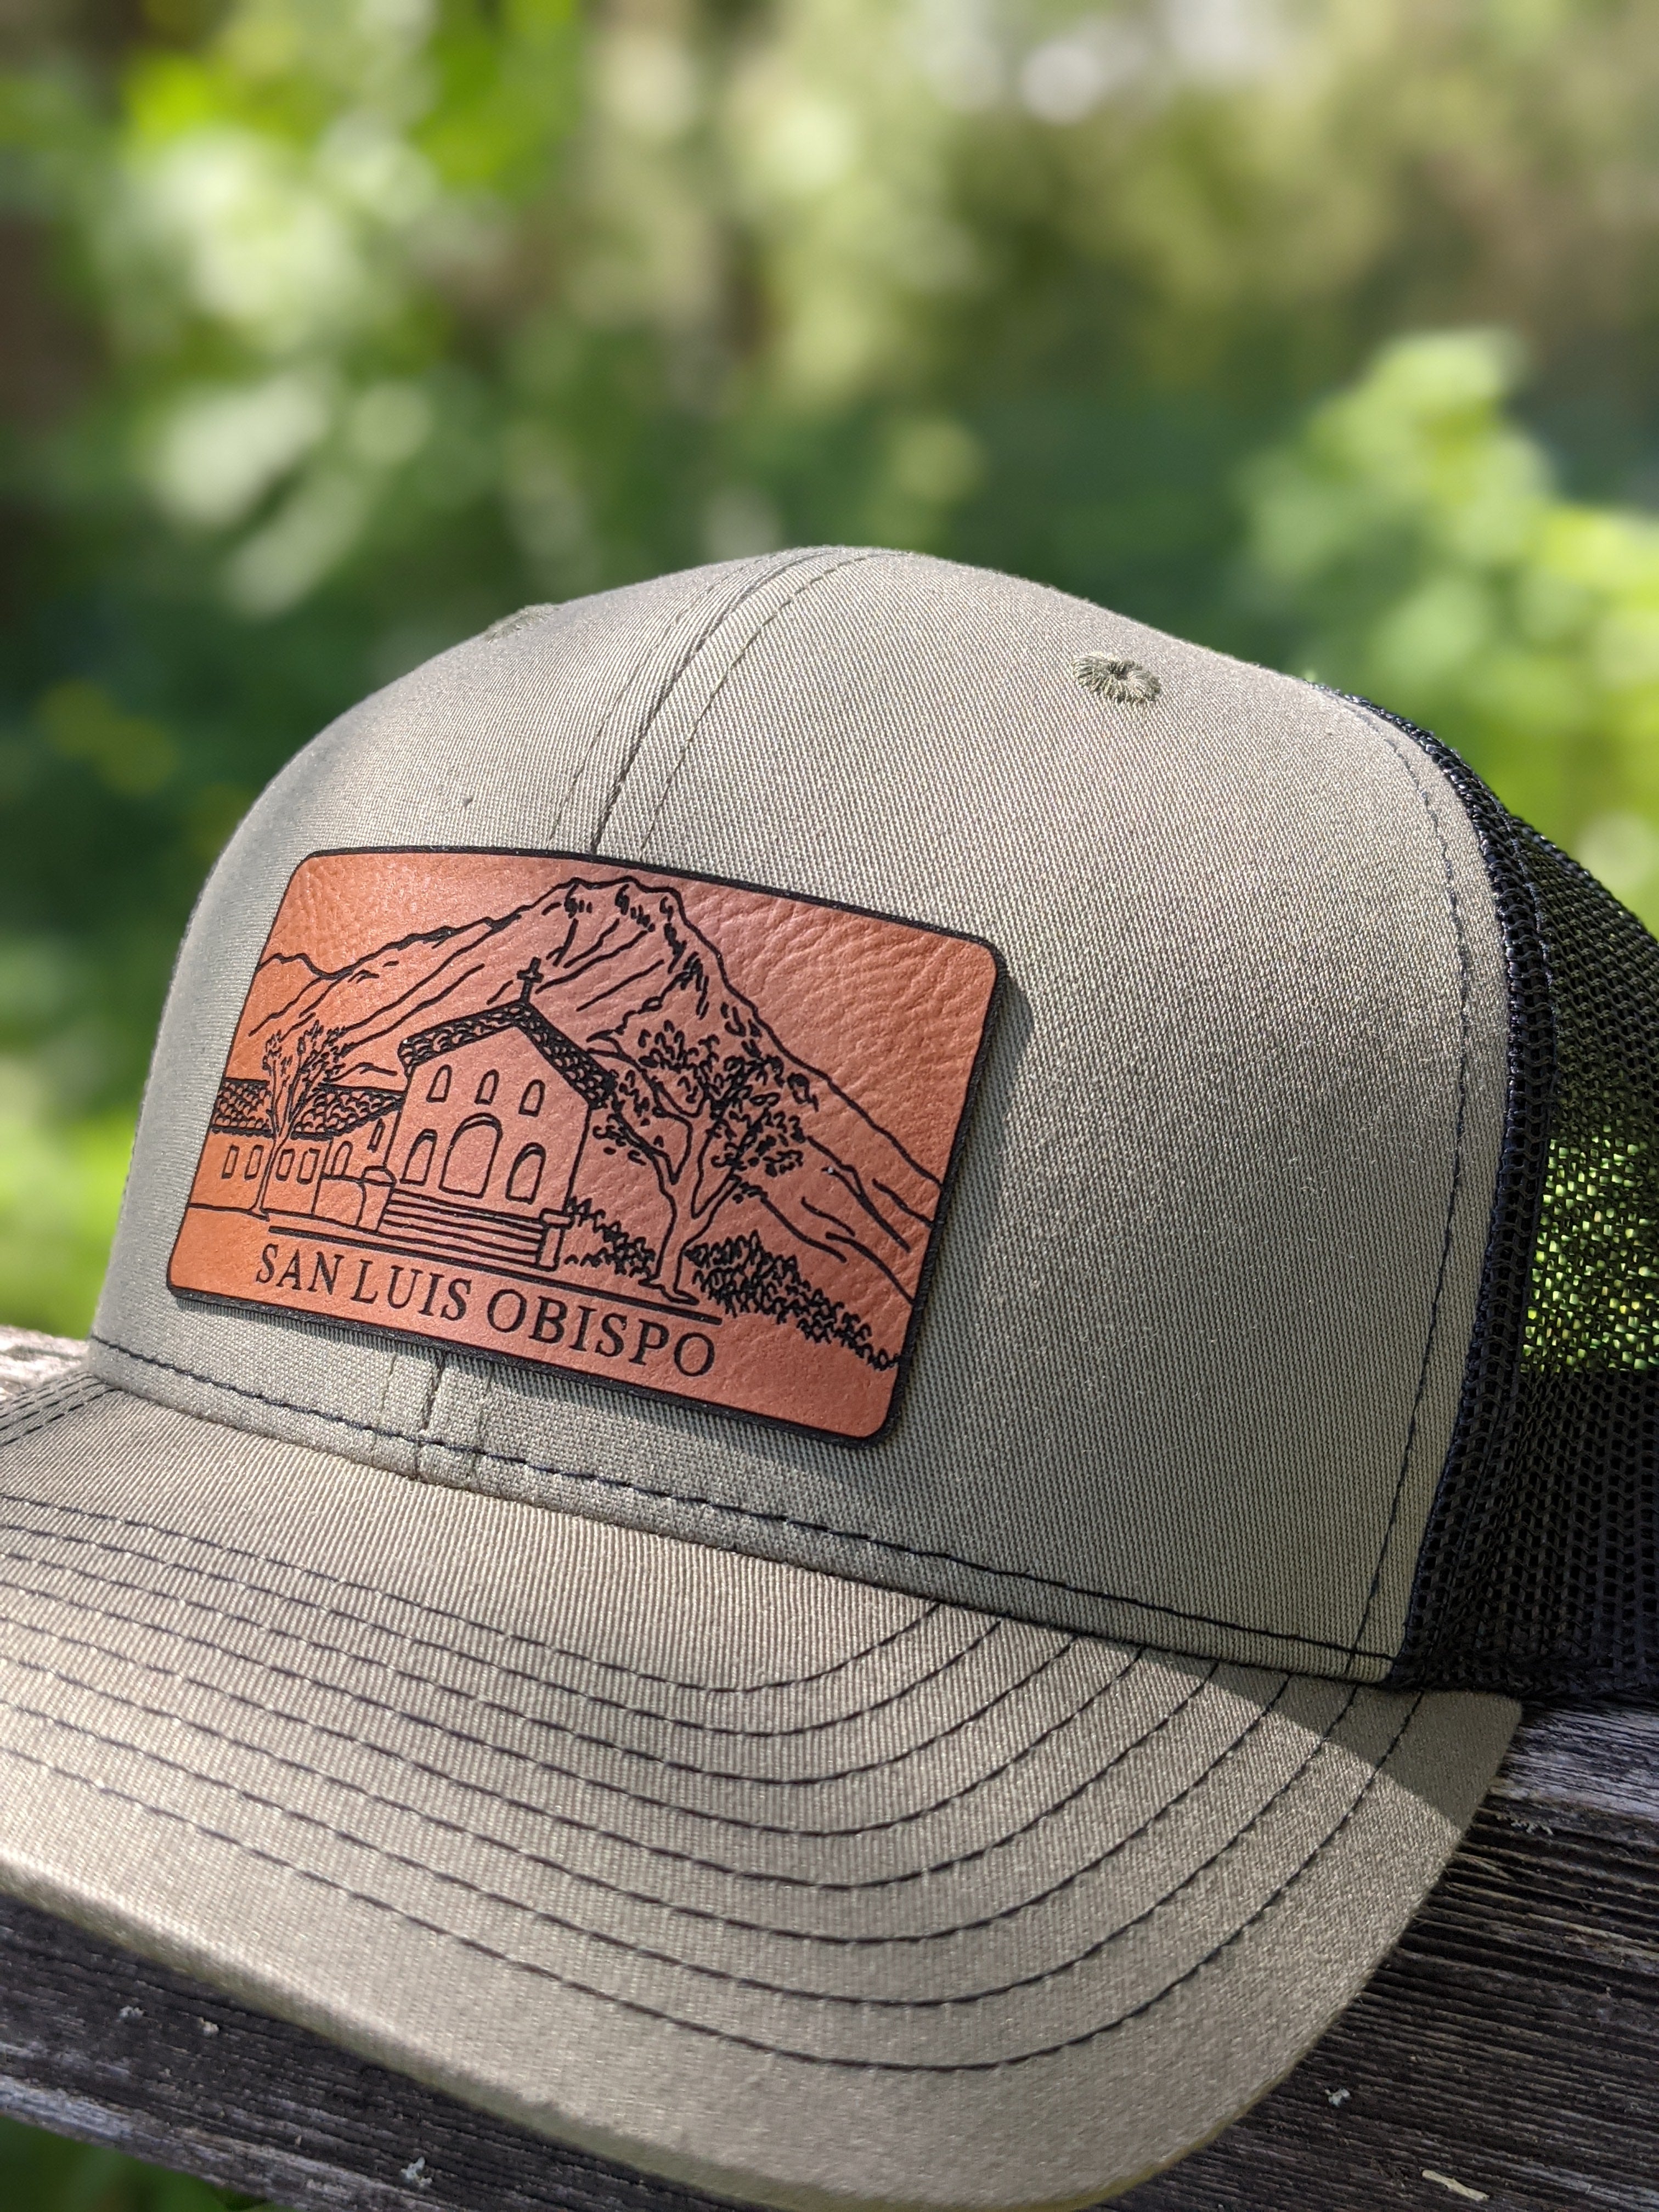 Trucker hat with black mesh on back, olive green colored front and leather patch depicting the Mission and Madonna Mountain. The patch reads "San Luis Obispo."